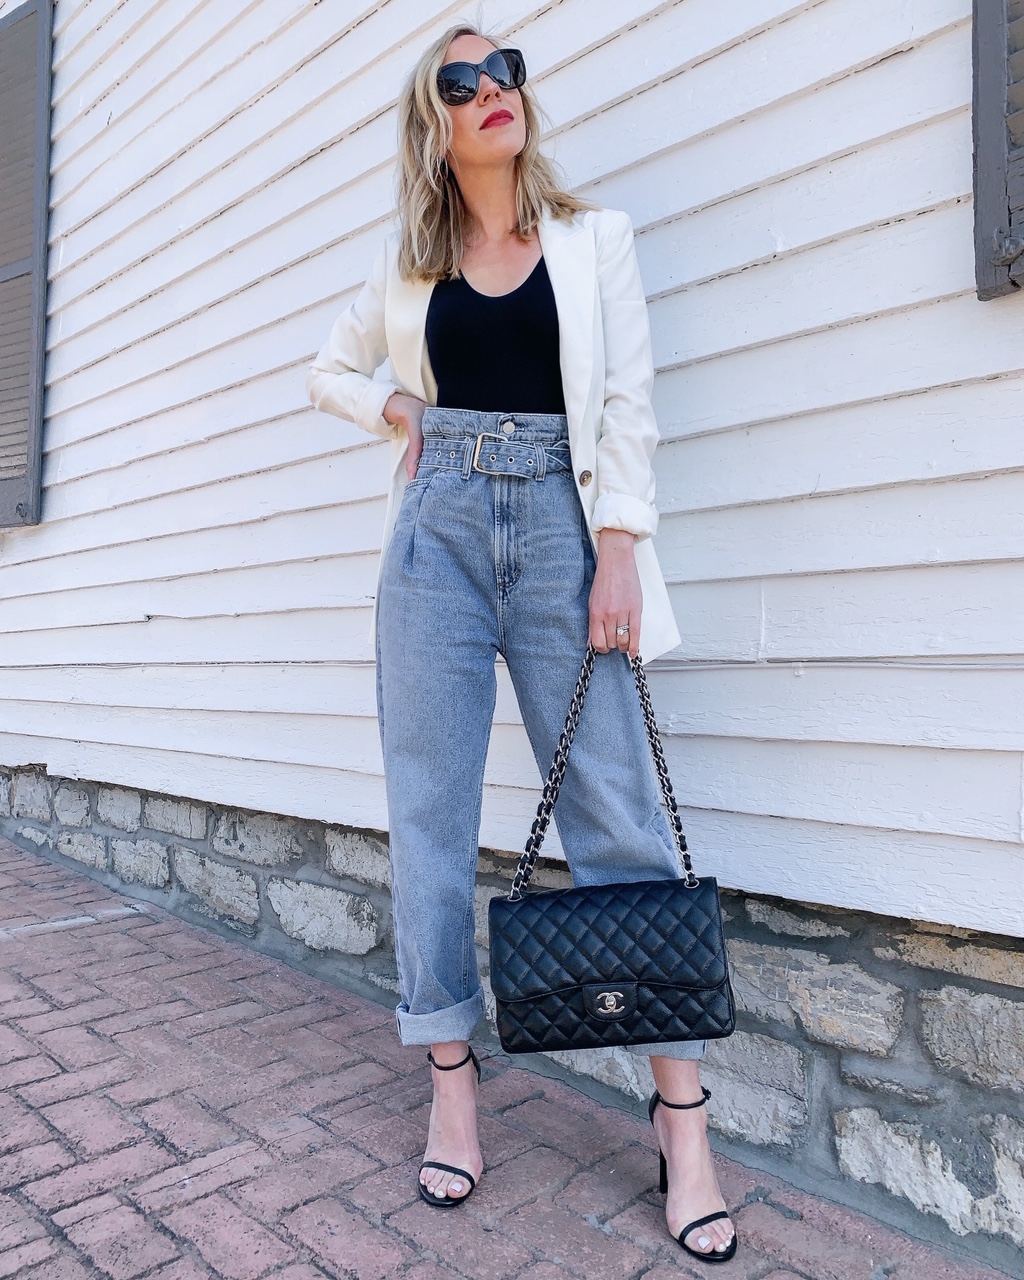 Agolde Jeans and My #OOTD, US fashion